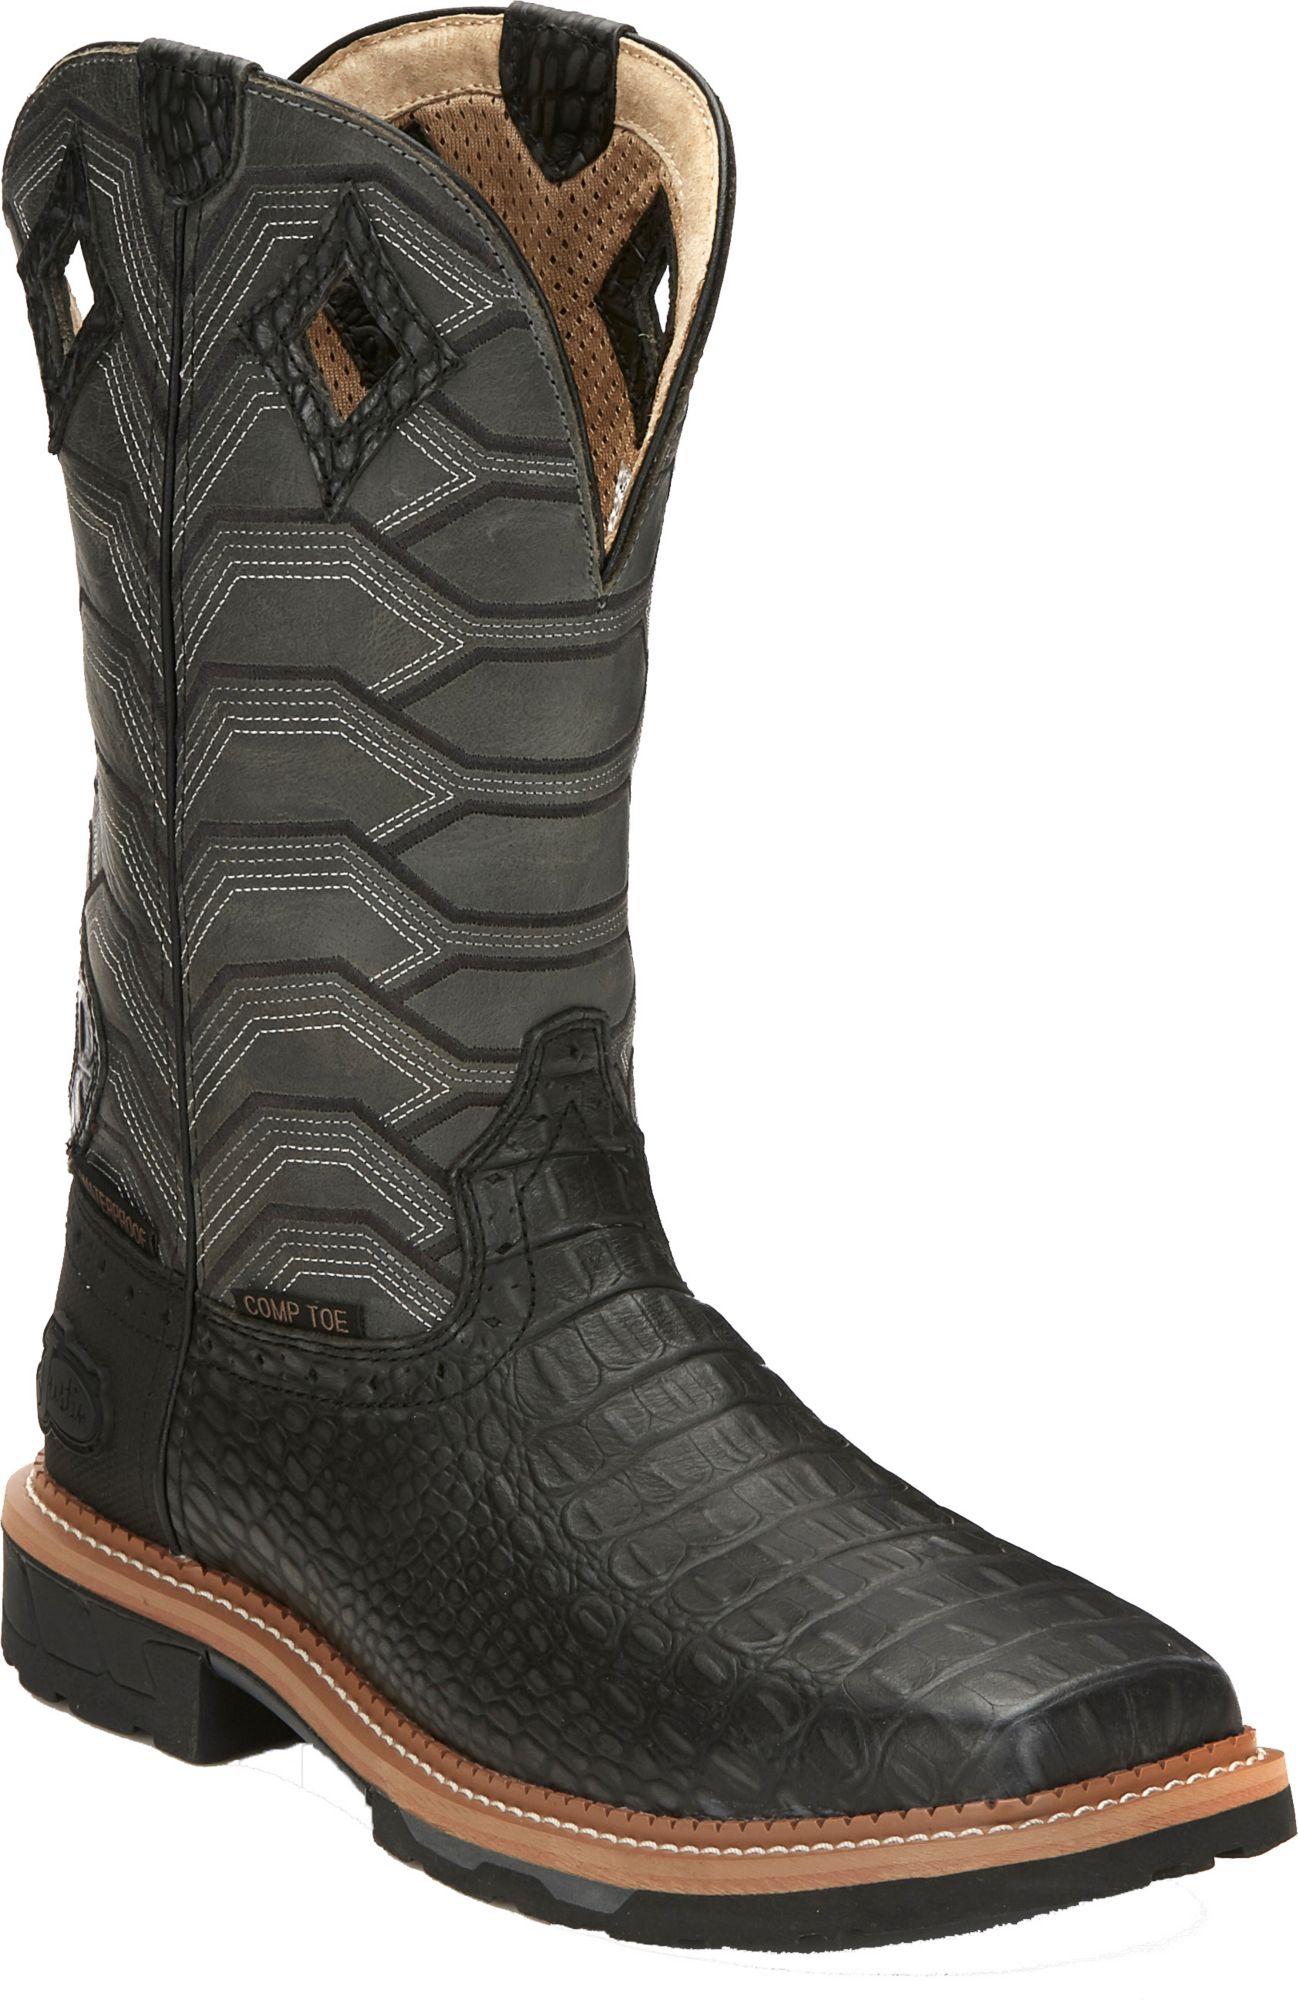 justin men's rustic barnwood waterproof hybred composition toe work boots